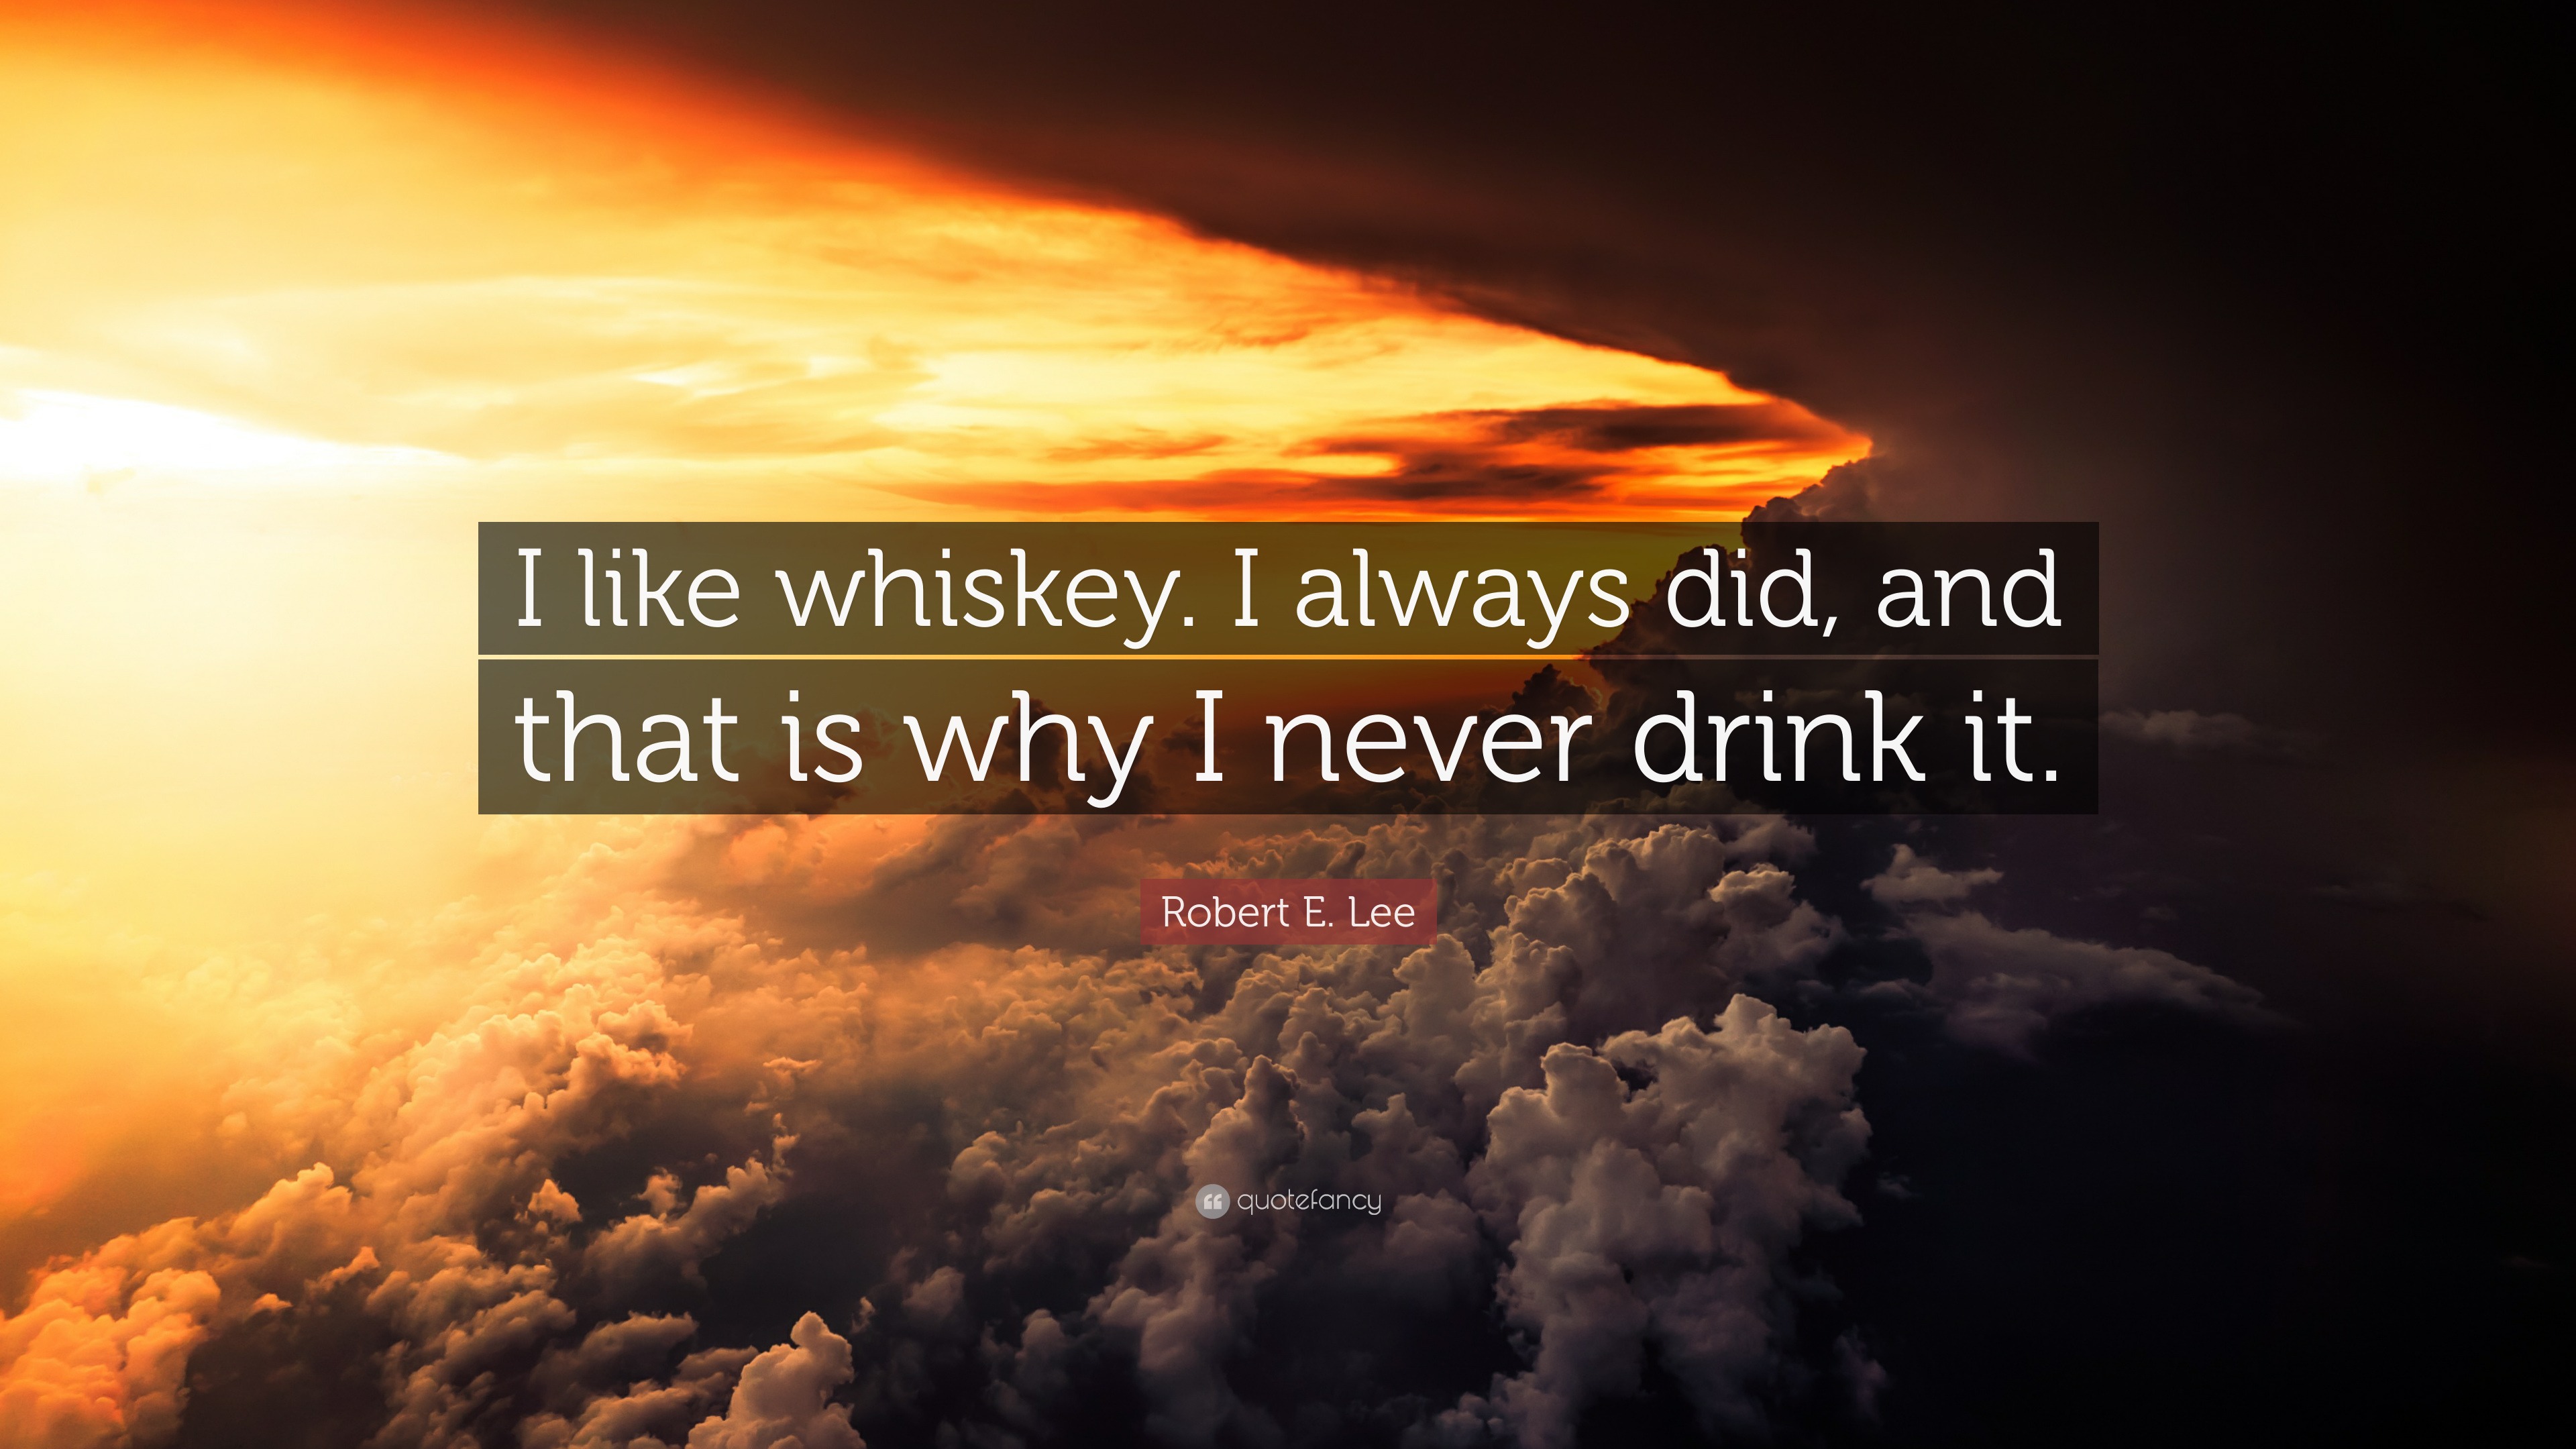 Robert E. Lee Quote: “I like whiskey. I always did, and that is why I never